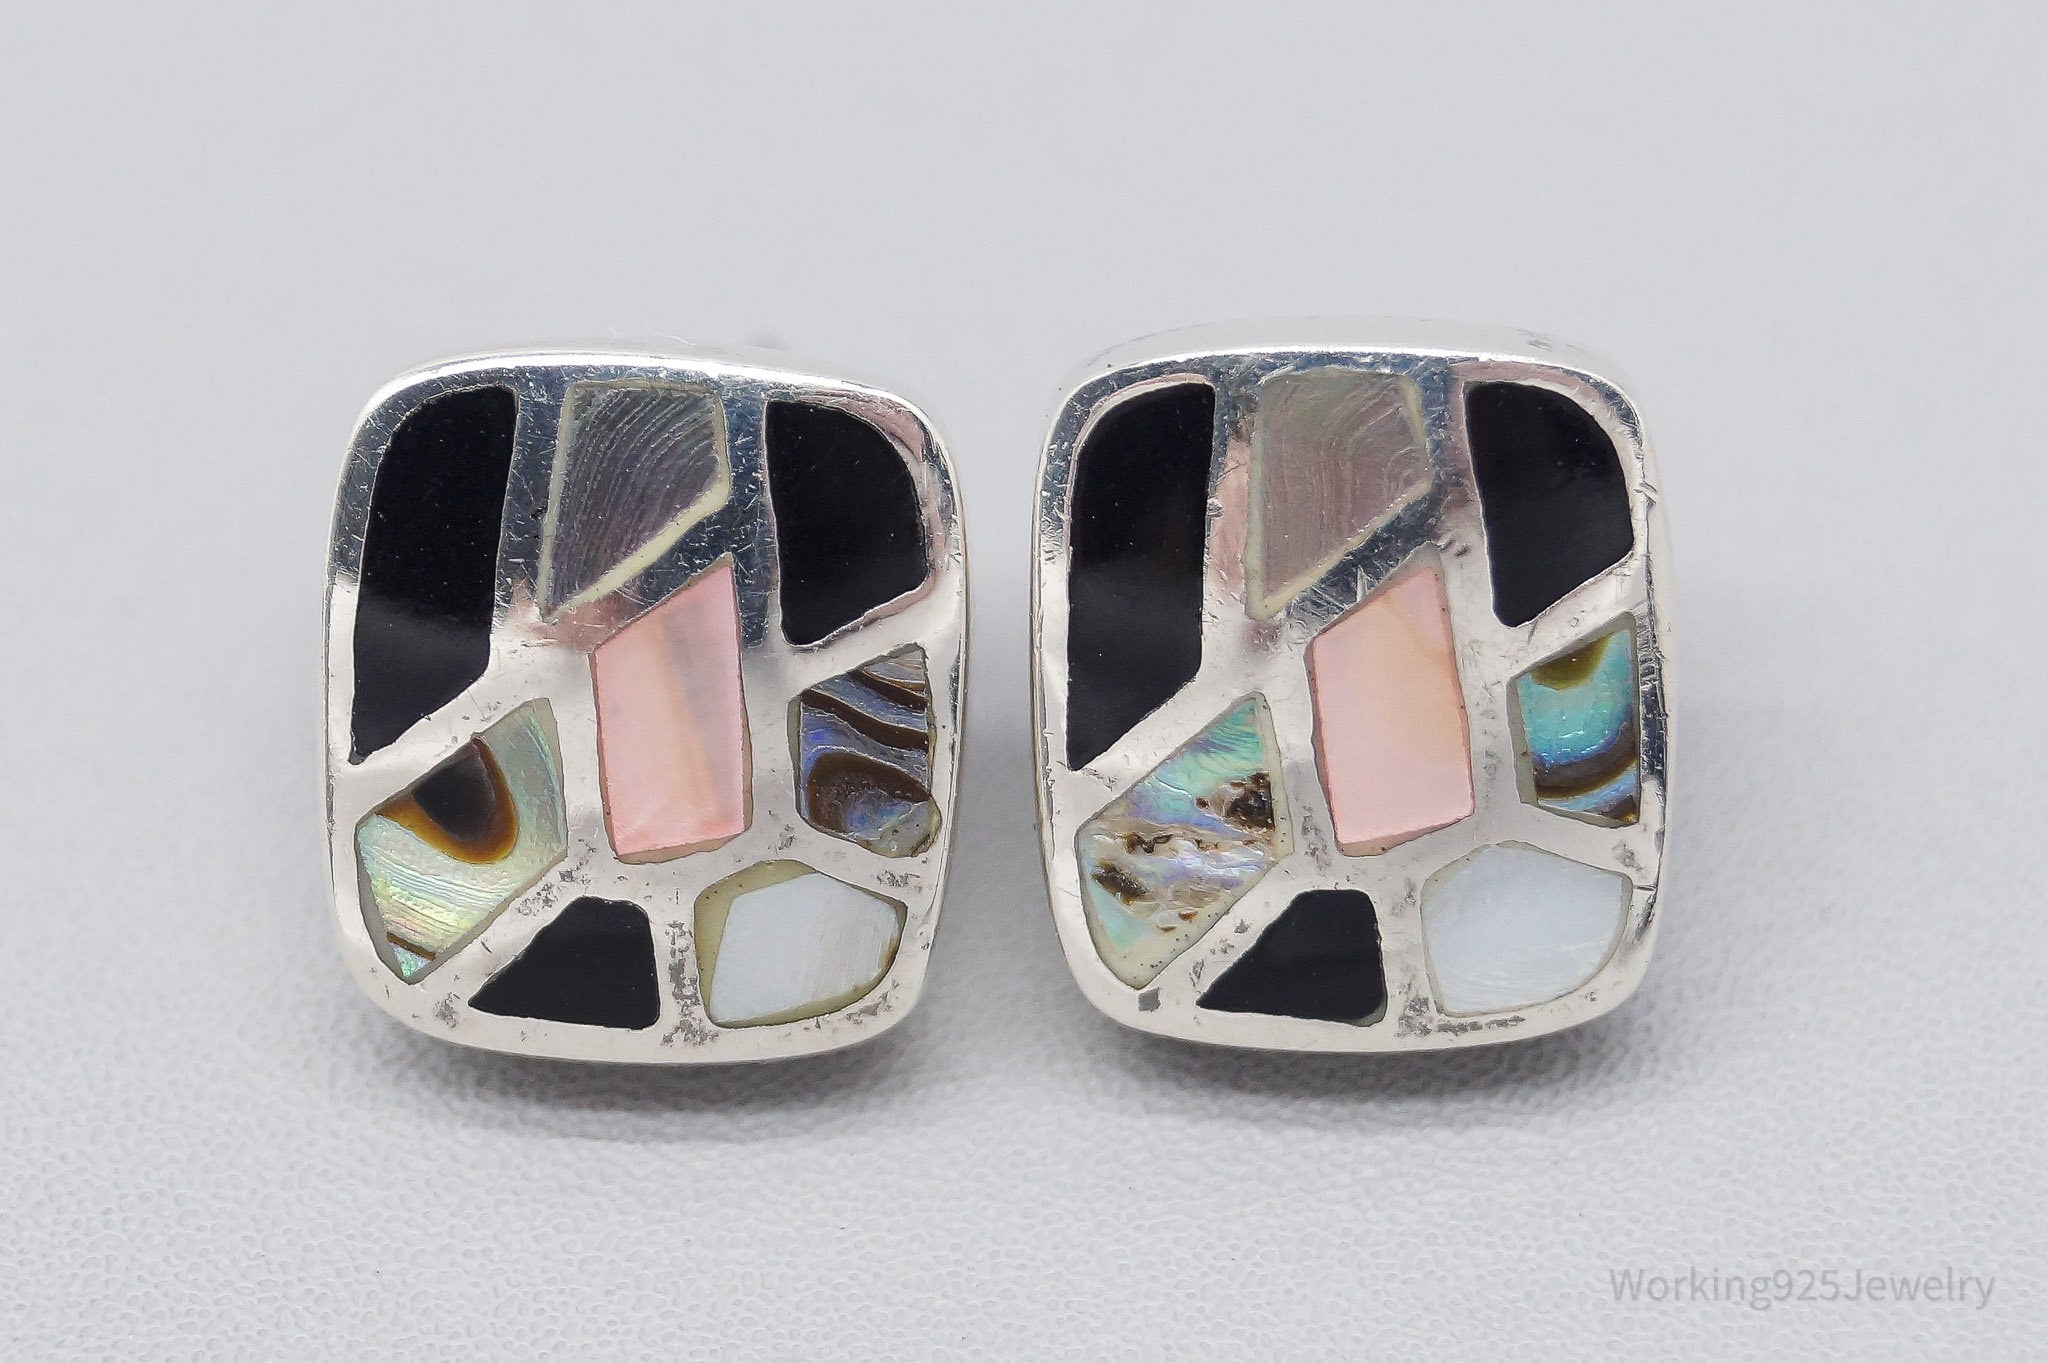 VTG Mother Of Pearl Black Onyx Paua Abalone Shell Inlay Sterling Silver Earrings